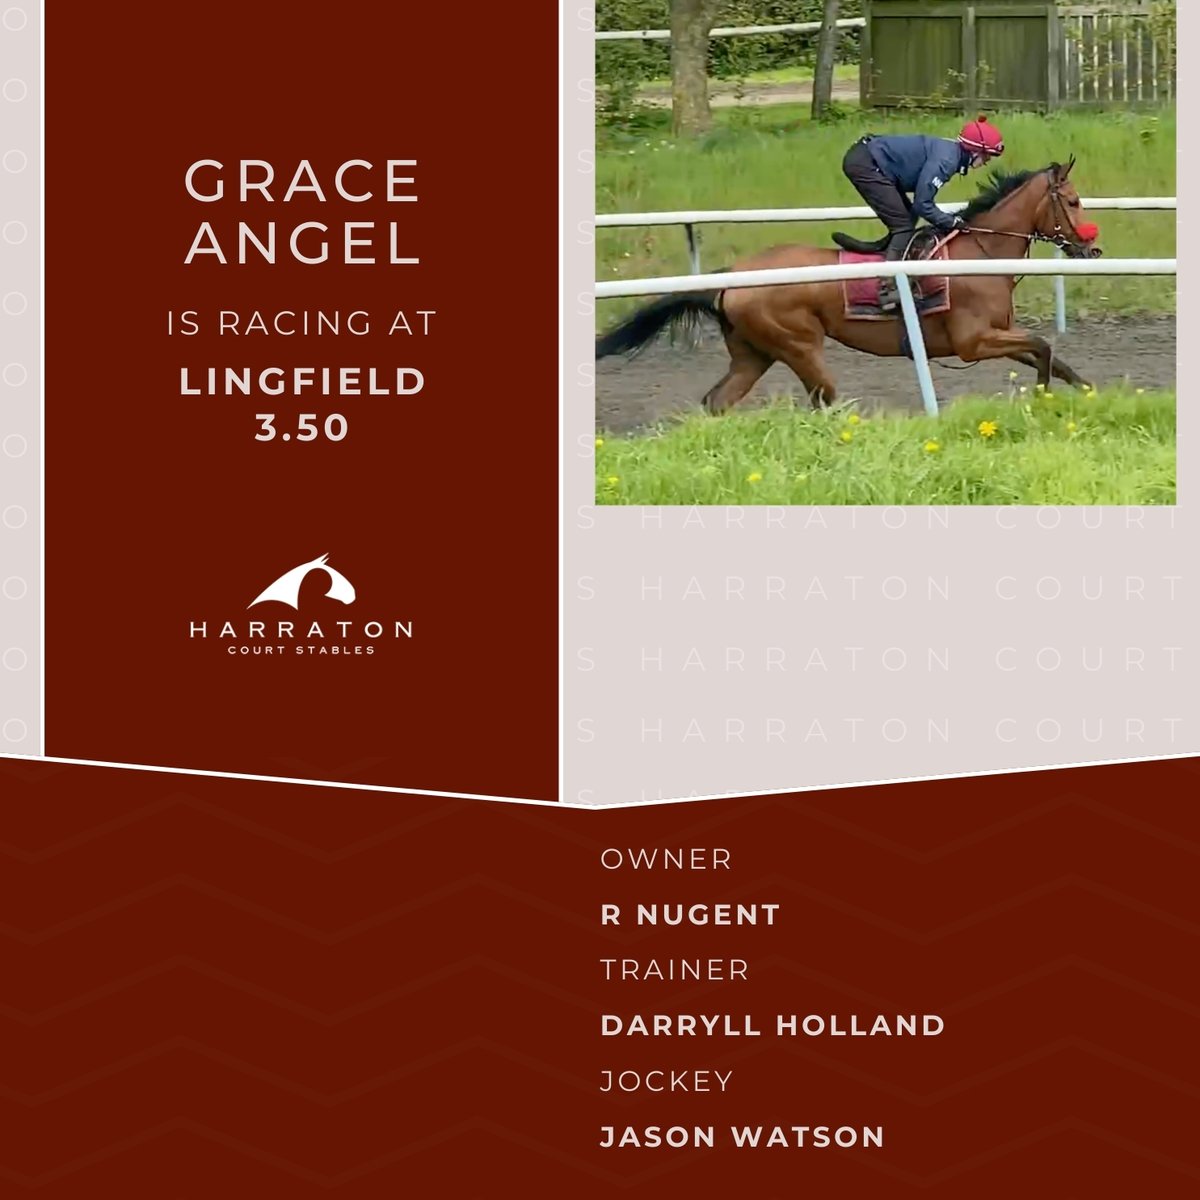 Grace Angel is ready to conquer Lingfield at 3.50! Wishing best of luck to owner R Nugent, under the expert training of #DarryllHolland and skilfully ridden by jockey @_JasonWatson 🍀🤞